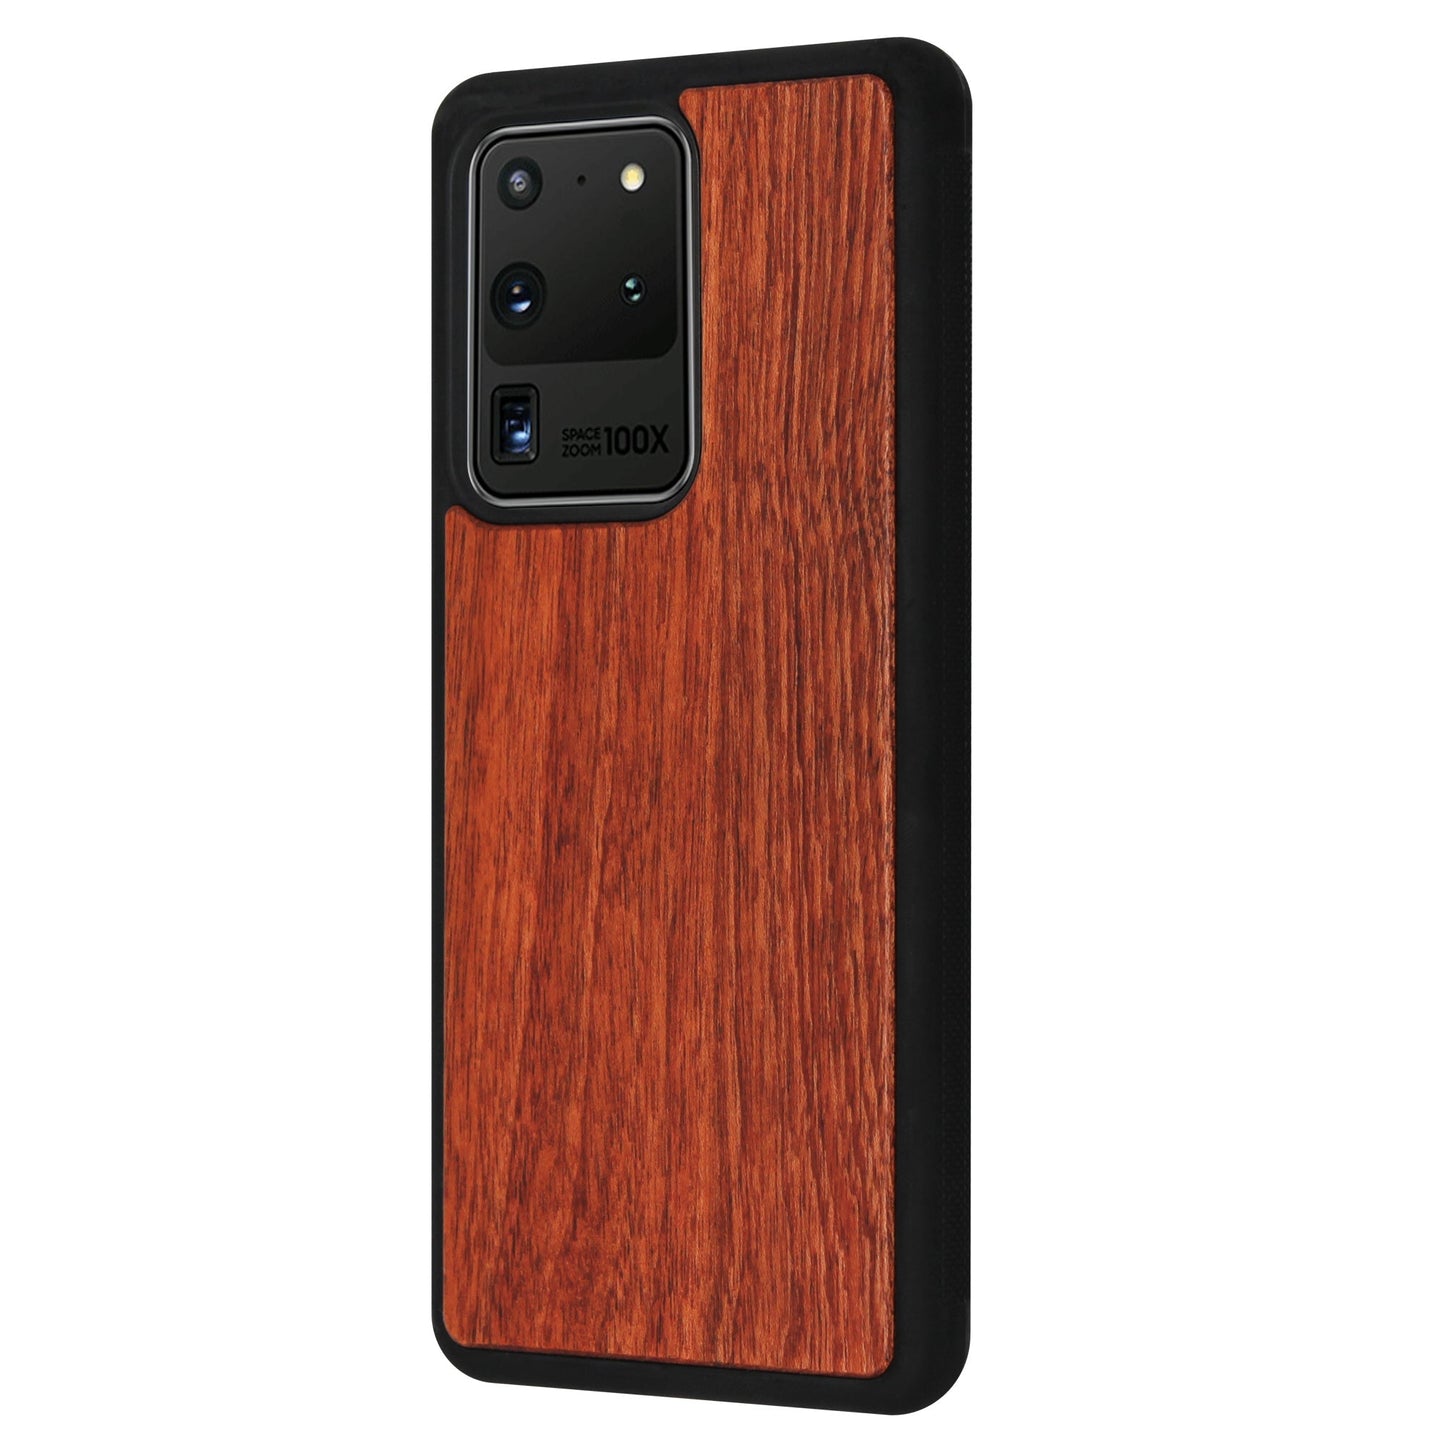 Rosewood Eden case for Samsung Galaxy S20 Ultra